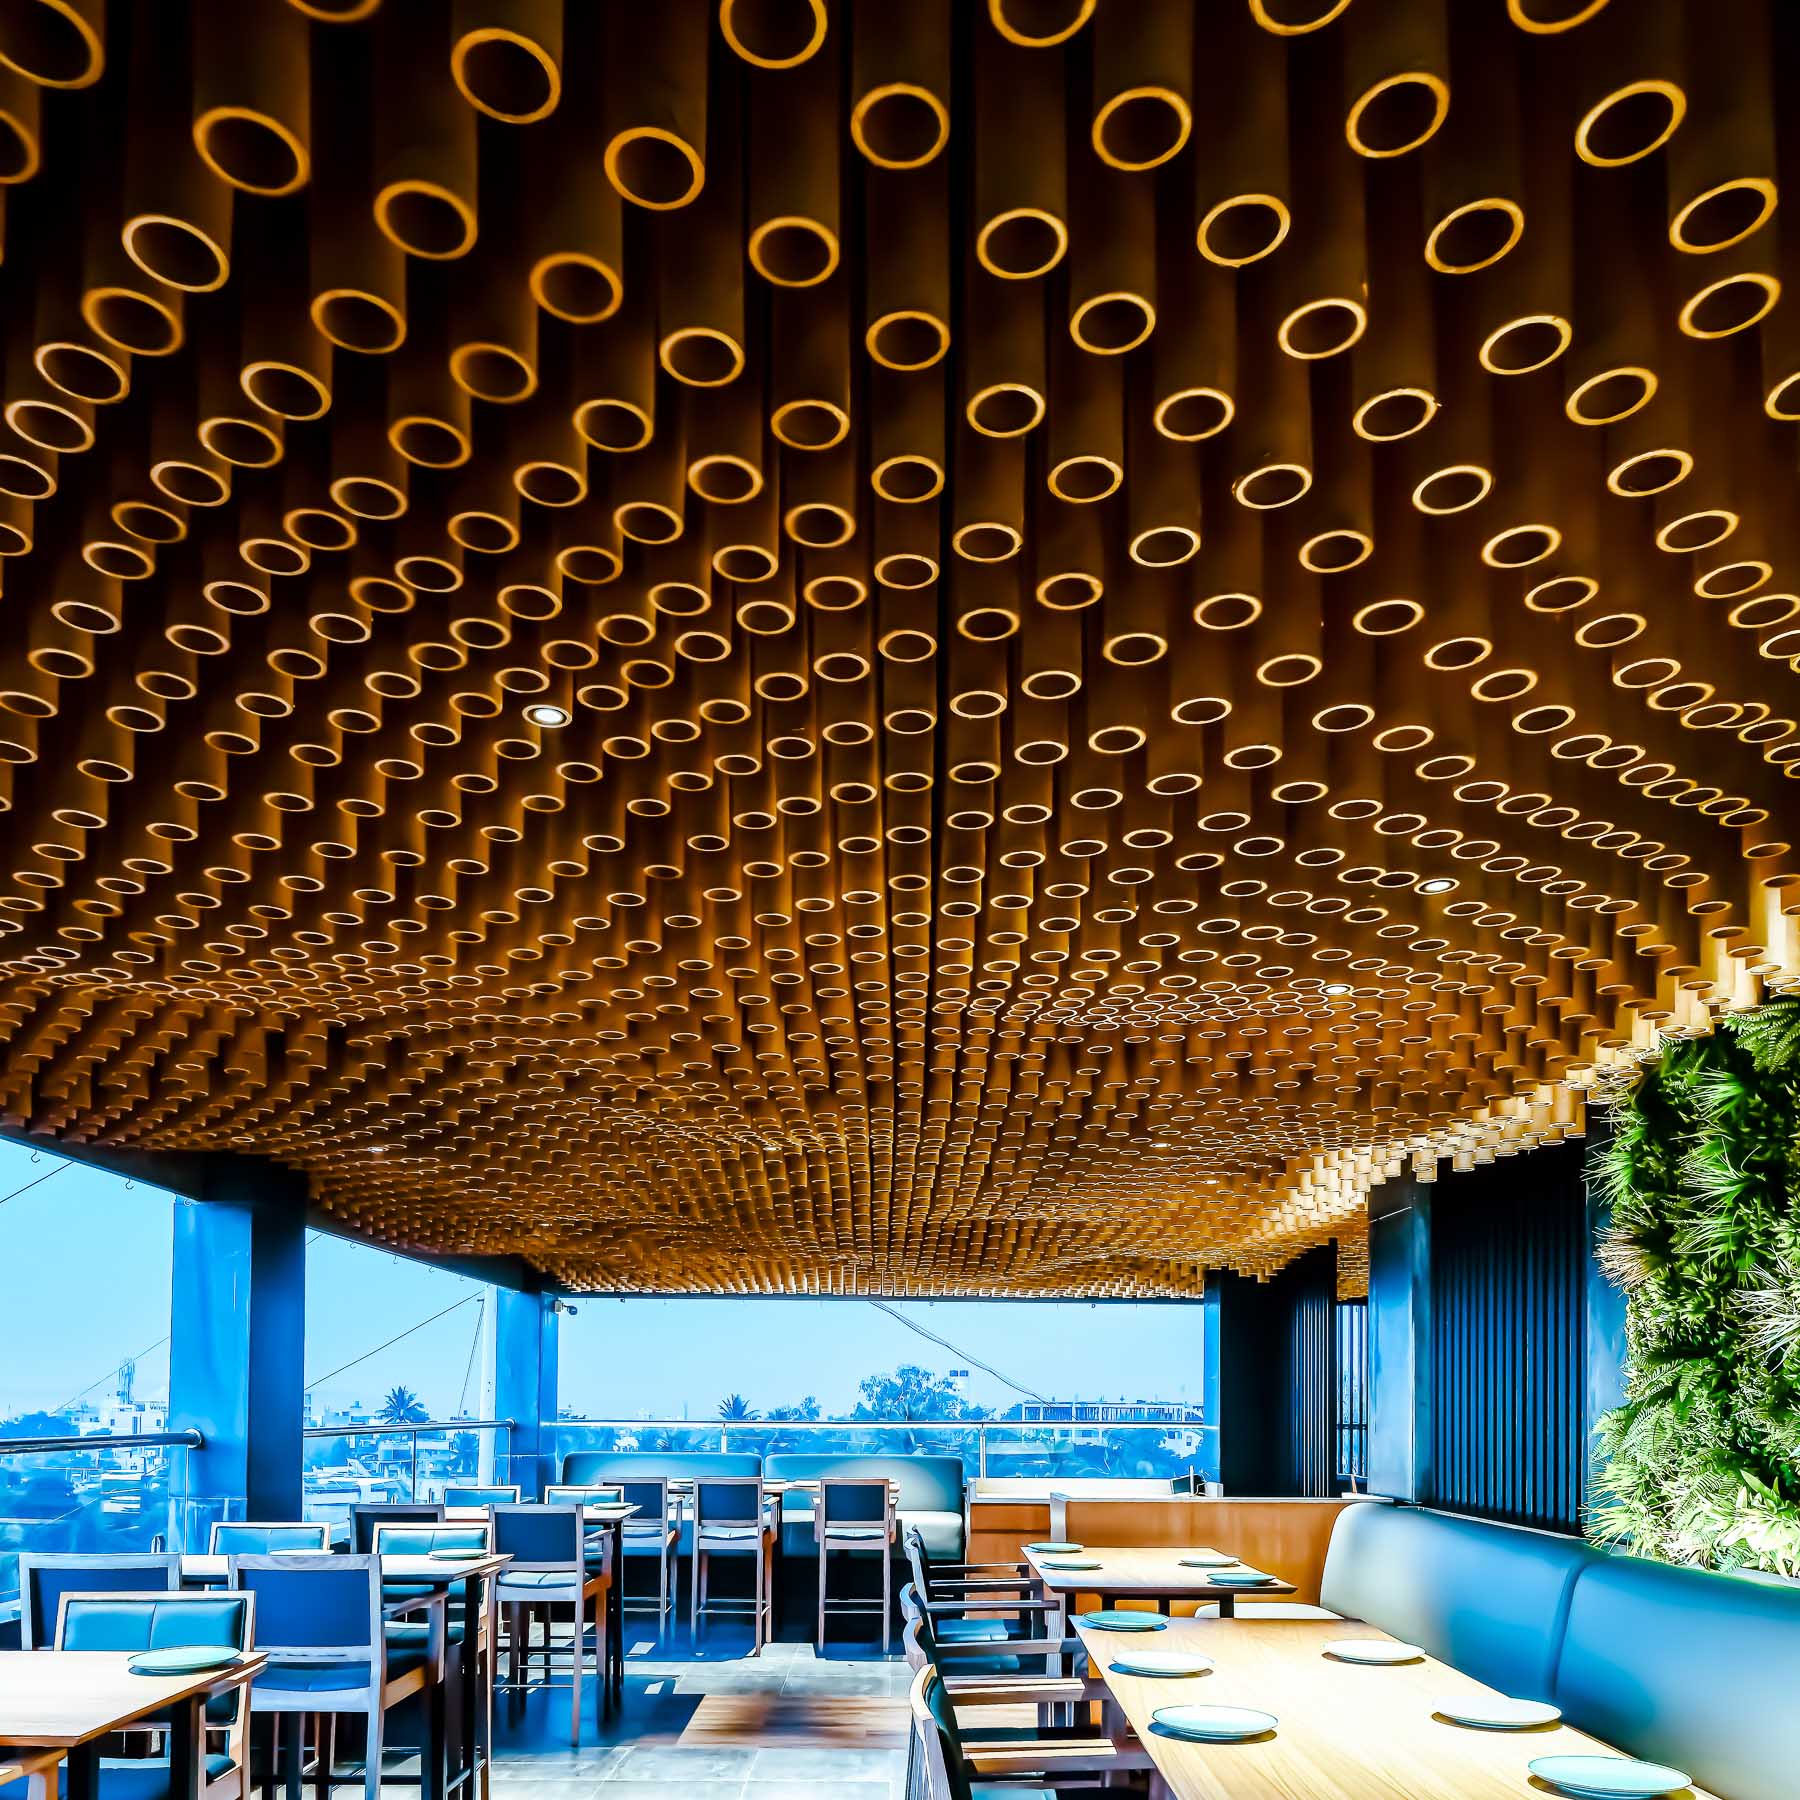 This modern restaurant includes 20521 paper tubes hung from the ceiling in a parametric installation.